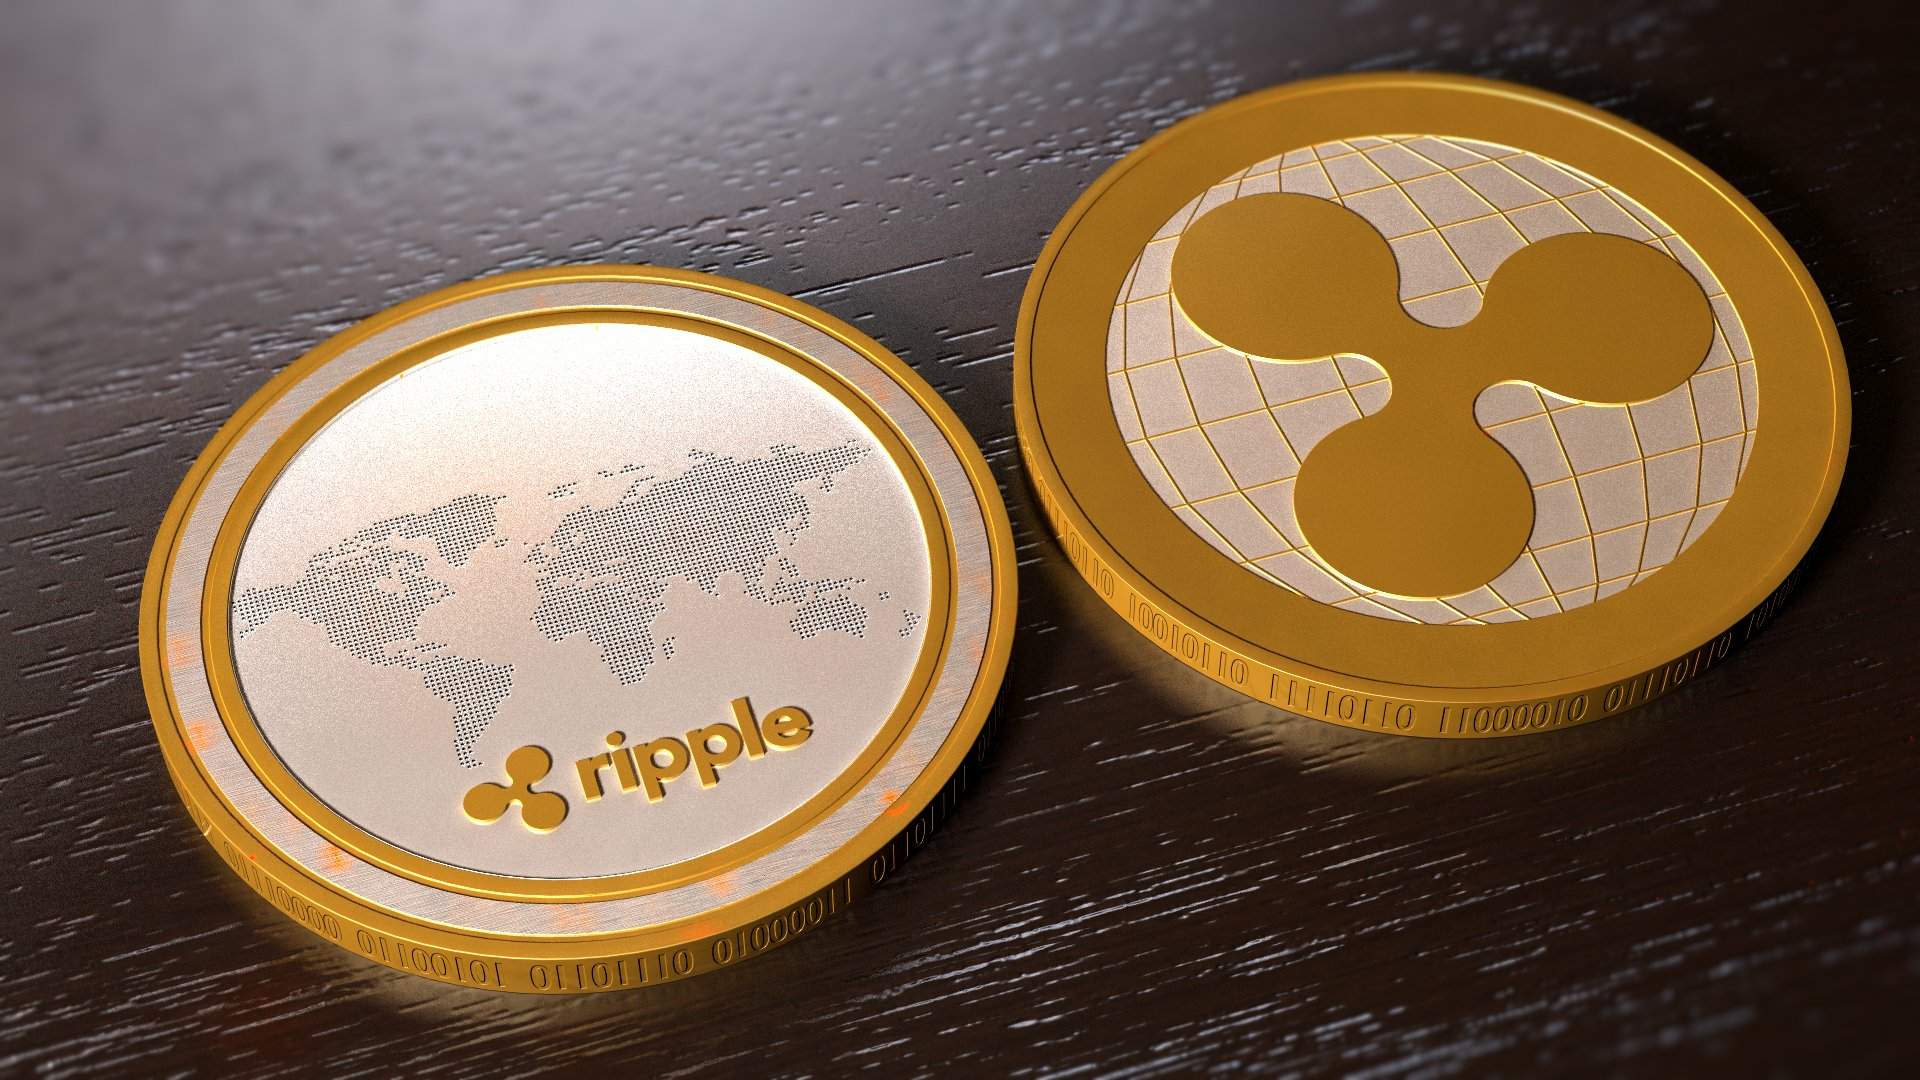 Ripple Execs Are Now Billionaires Thanks to XRP's Success